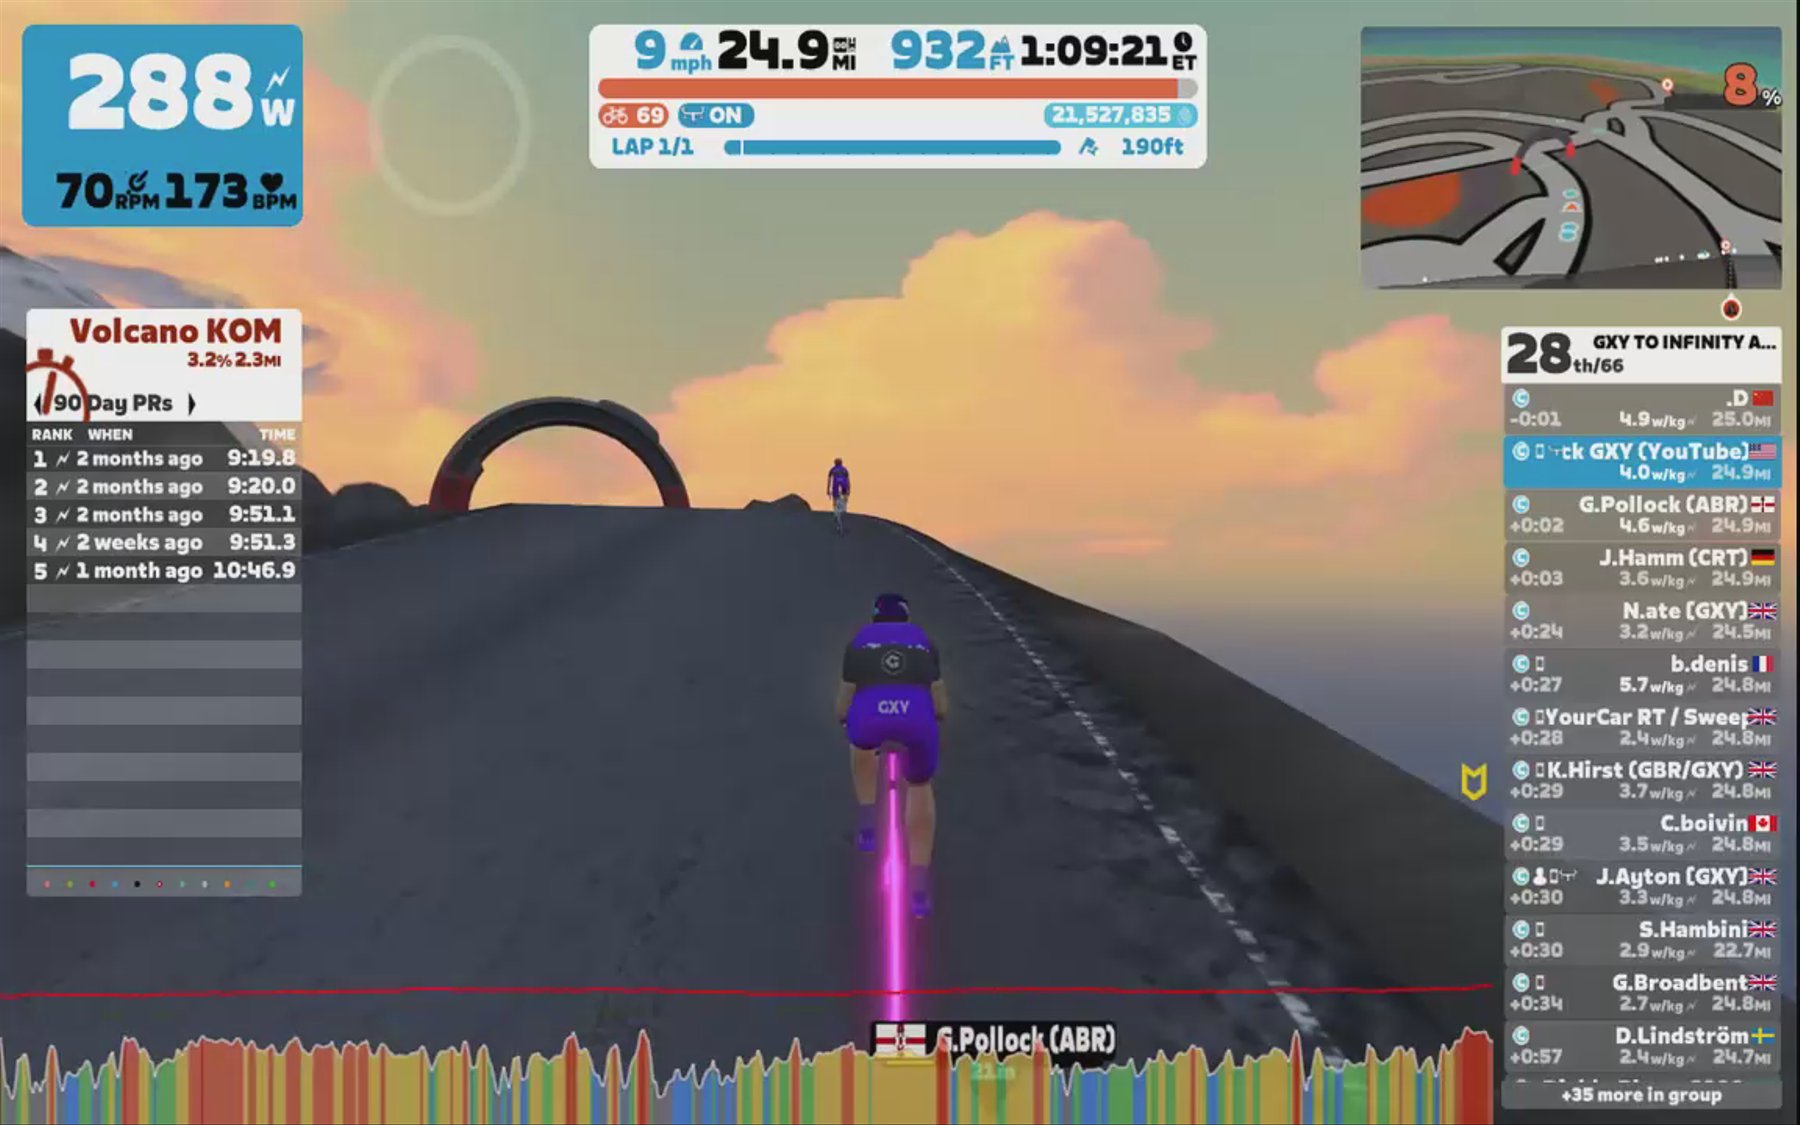 Zwift - Group Ride: GXY TO INFINITY AND BEYOND [2.5-3.2 WKG] CAT C (C) on Volcano Climb After Party in Watopia